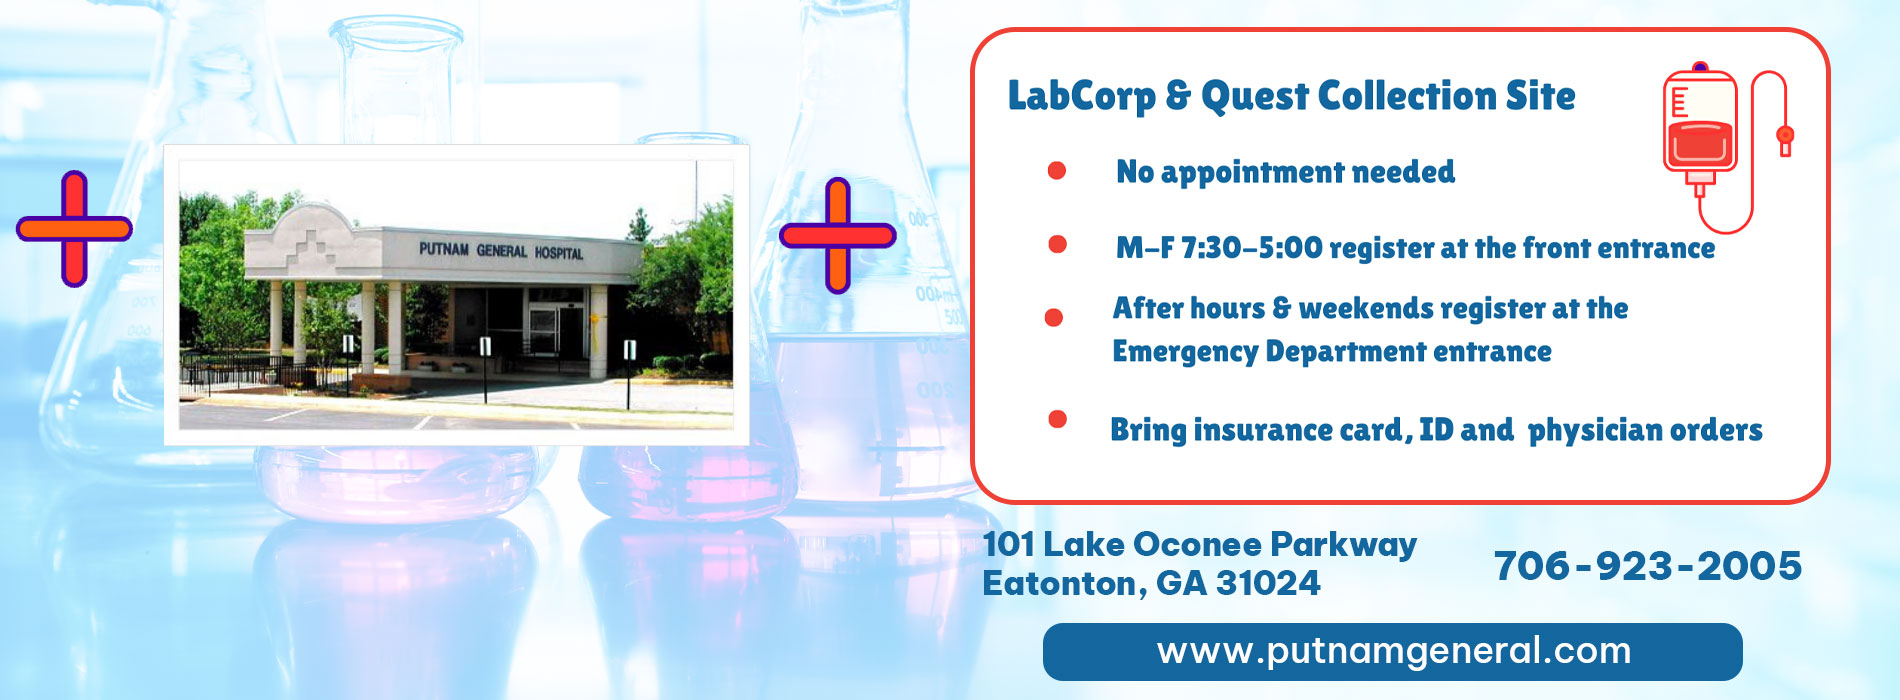 LabCorp & Quest Collection Site

No appointment needed

M-F 7:30 - 5:00 register at front entrance

After Hours & Weekends register at the Emergency Department entrance

Bring Insurance card, ID and physician order

101 Lake Oconee Parkway Eatonton, GA 31024

706-923-2005